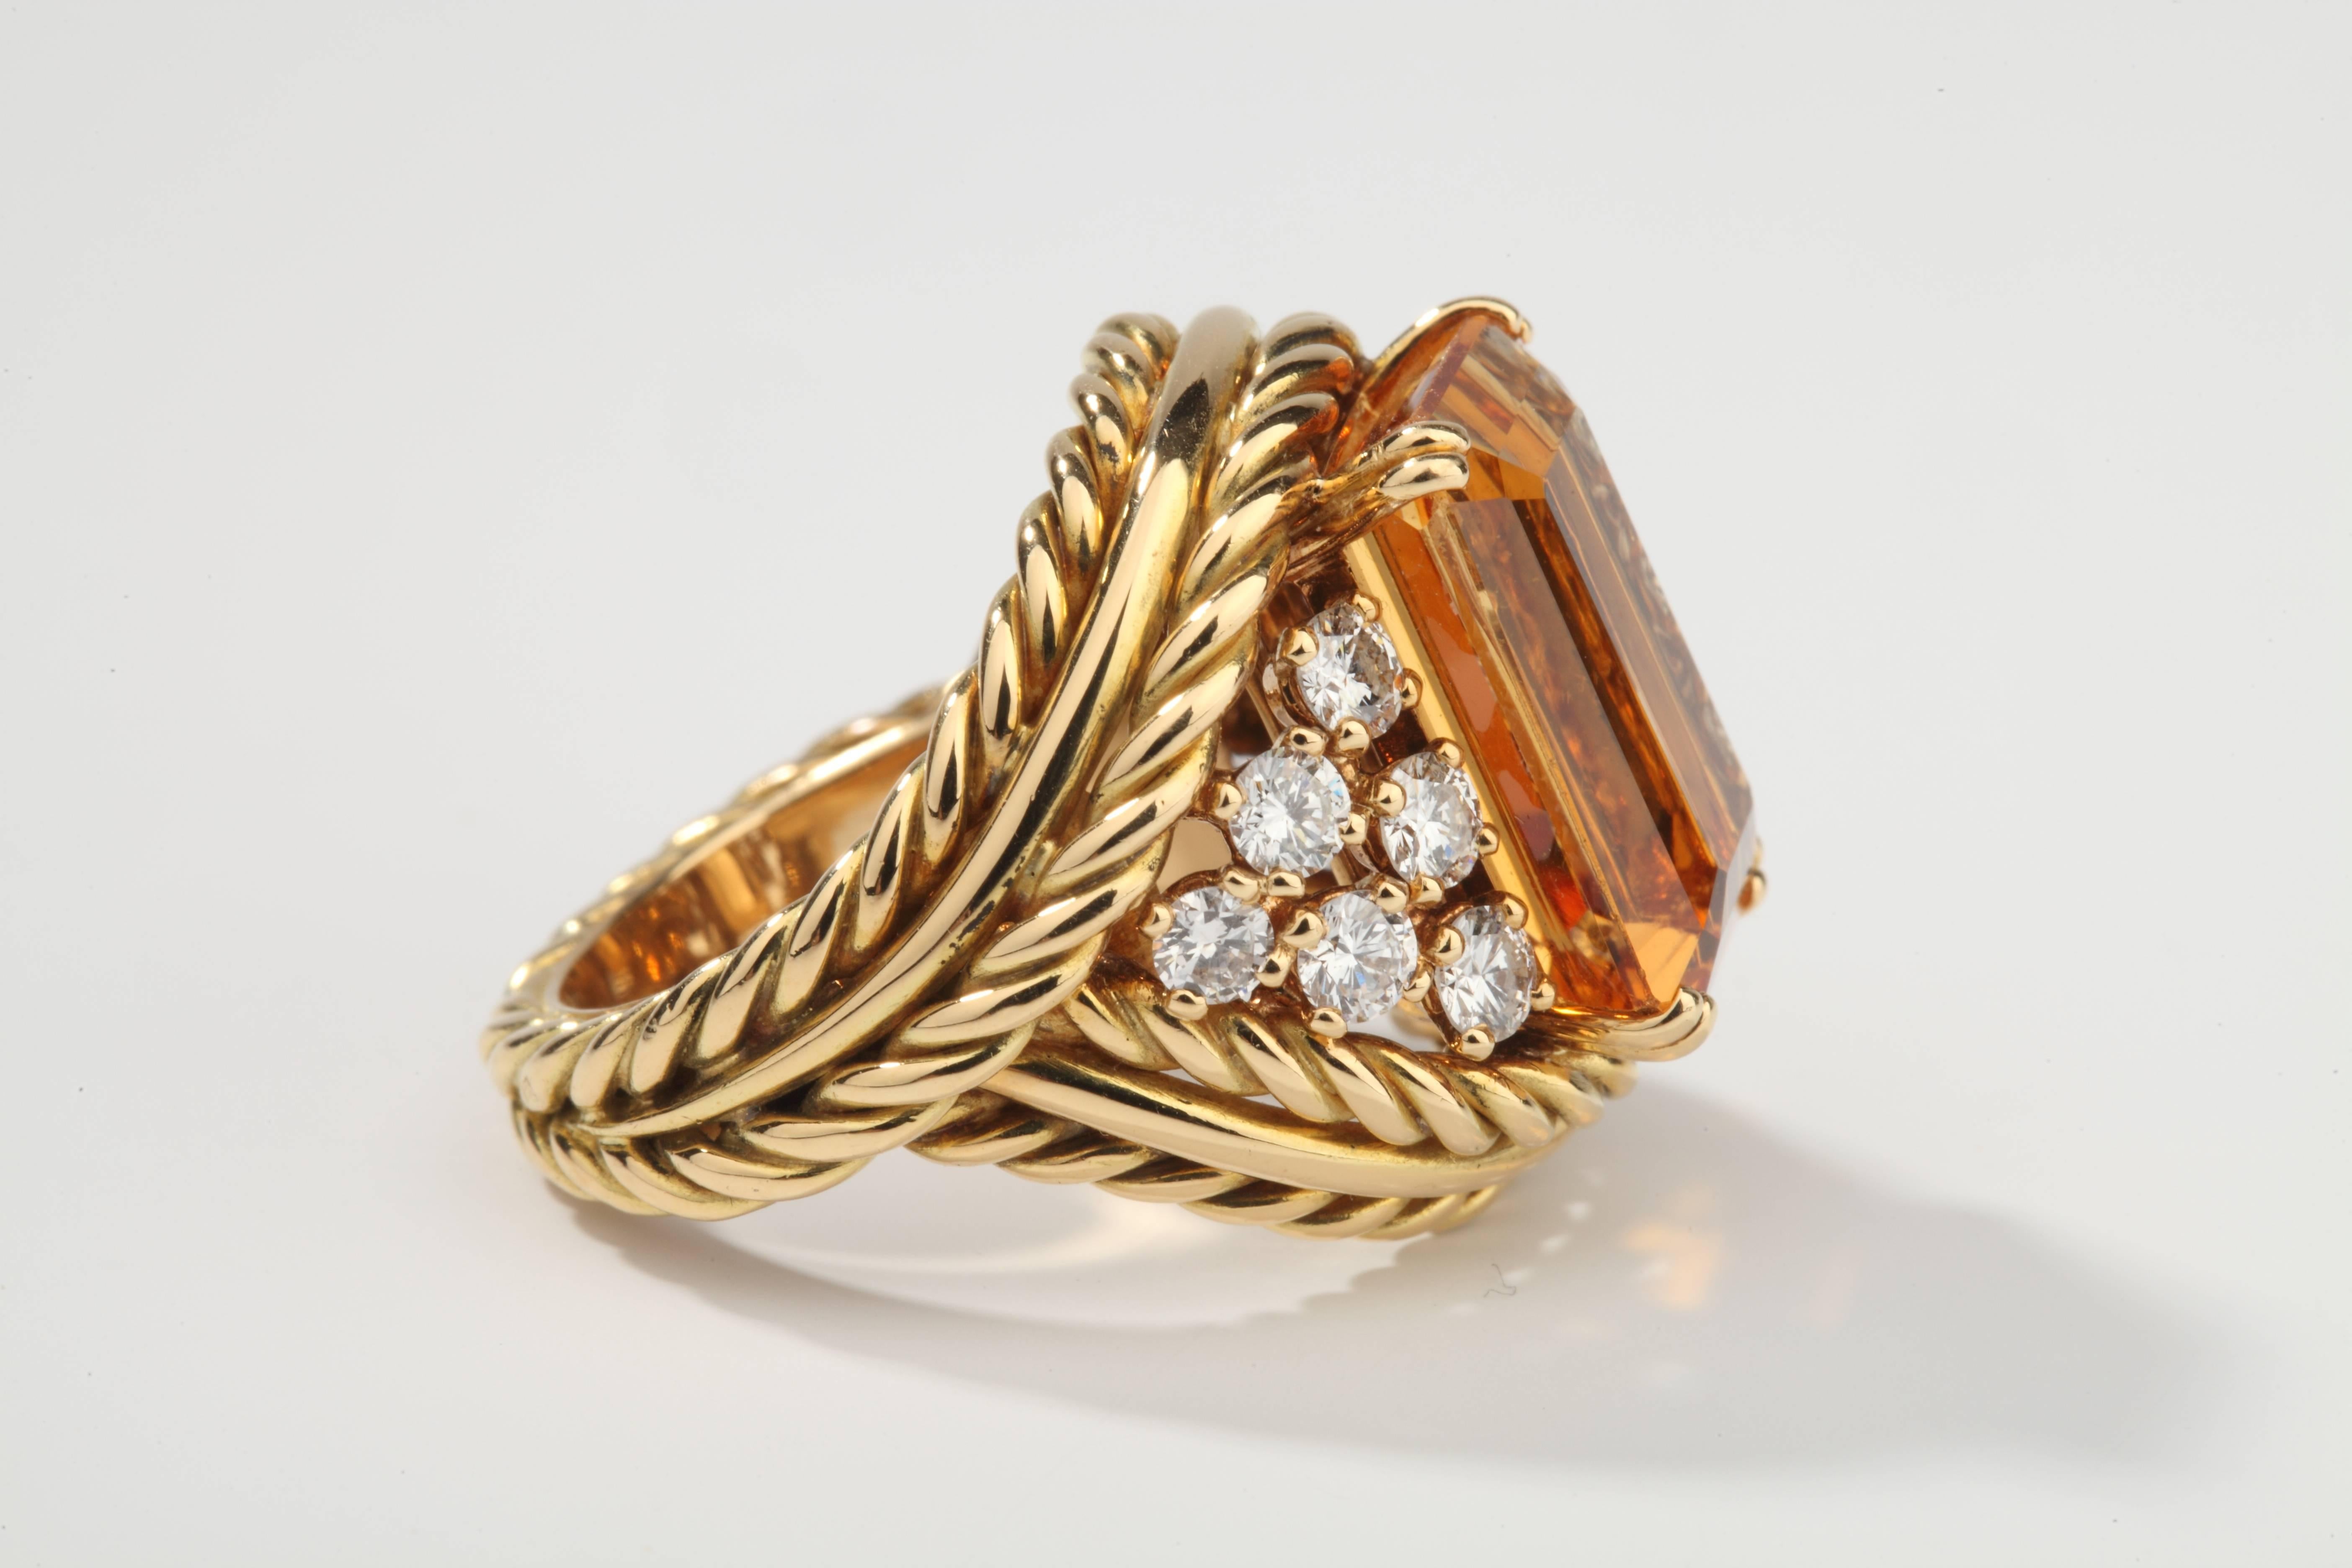 Yellow gold ring set with a rectangular cut natural Topaz, ornate with 12 brillant-cut diamonds.
The Topaz is accompanied by a GEM Lab certificate and weight around 11 ct.
Signed CHAUMET Paris.
French assay marks.
Size : US 6 / EU 52